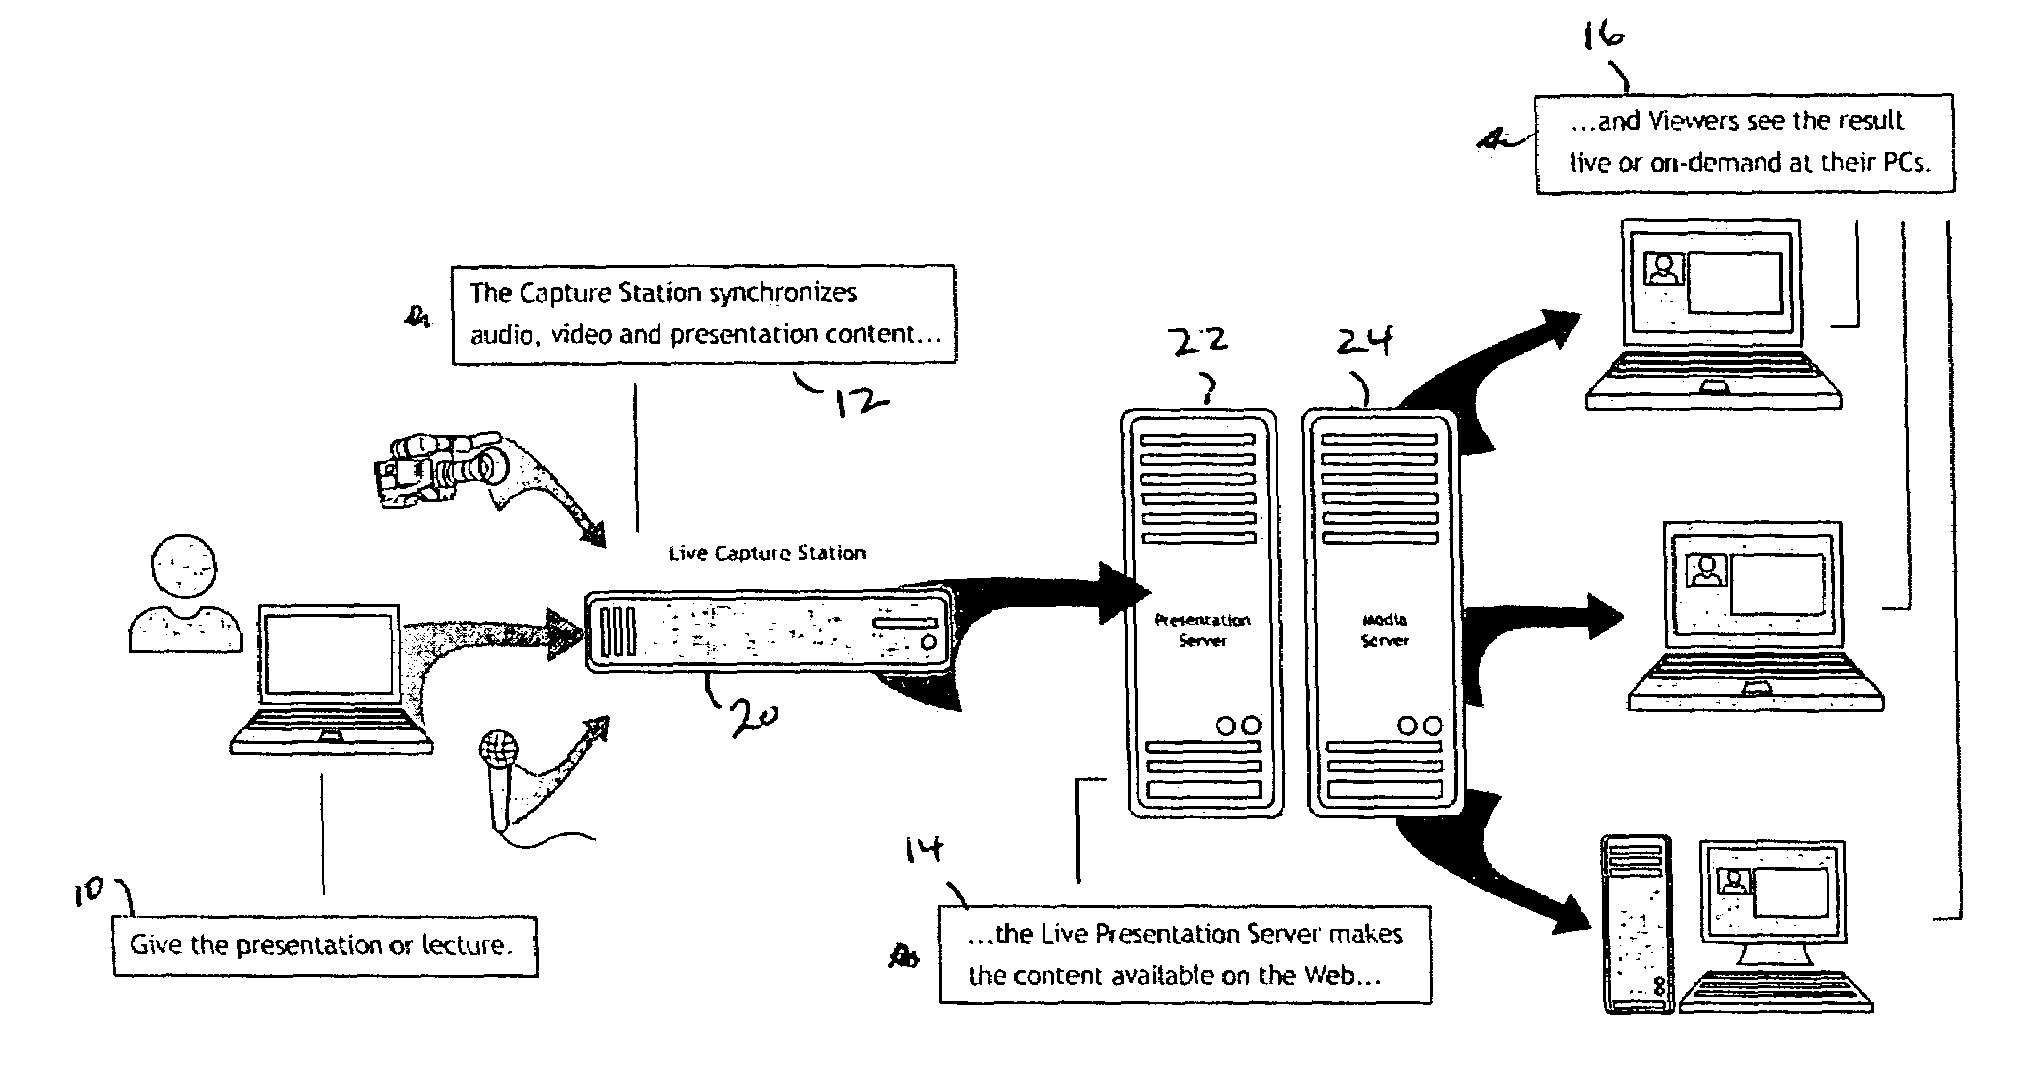 Rich media event production system and method including the capturing, indexing, and synchronizing of RGB-based graphic content